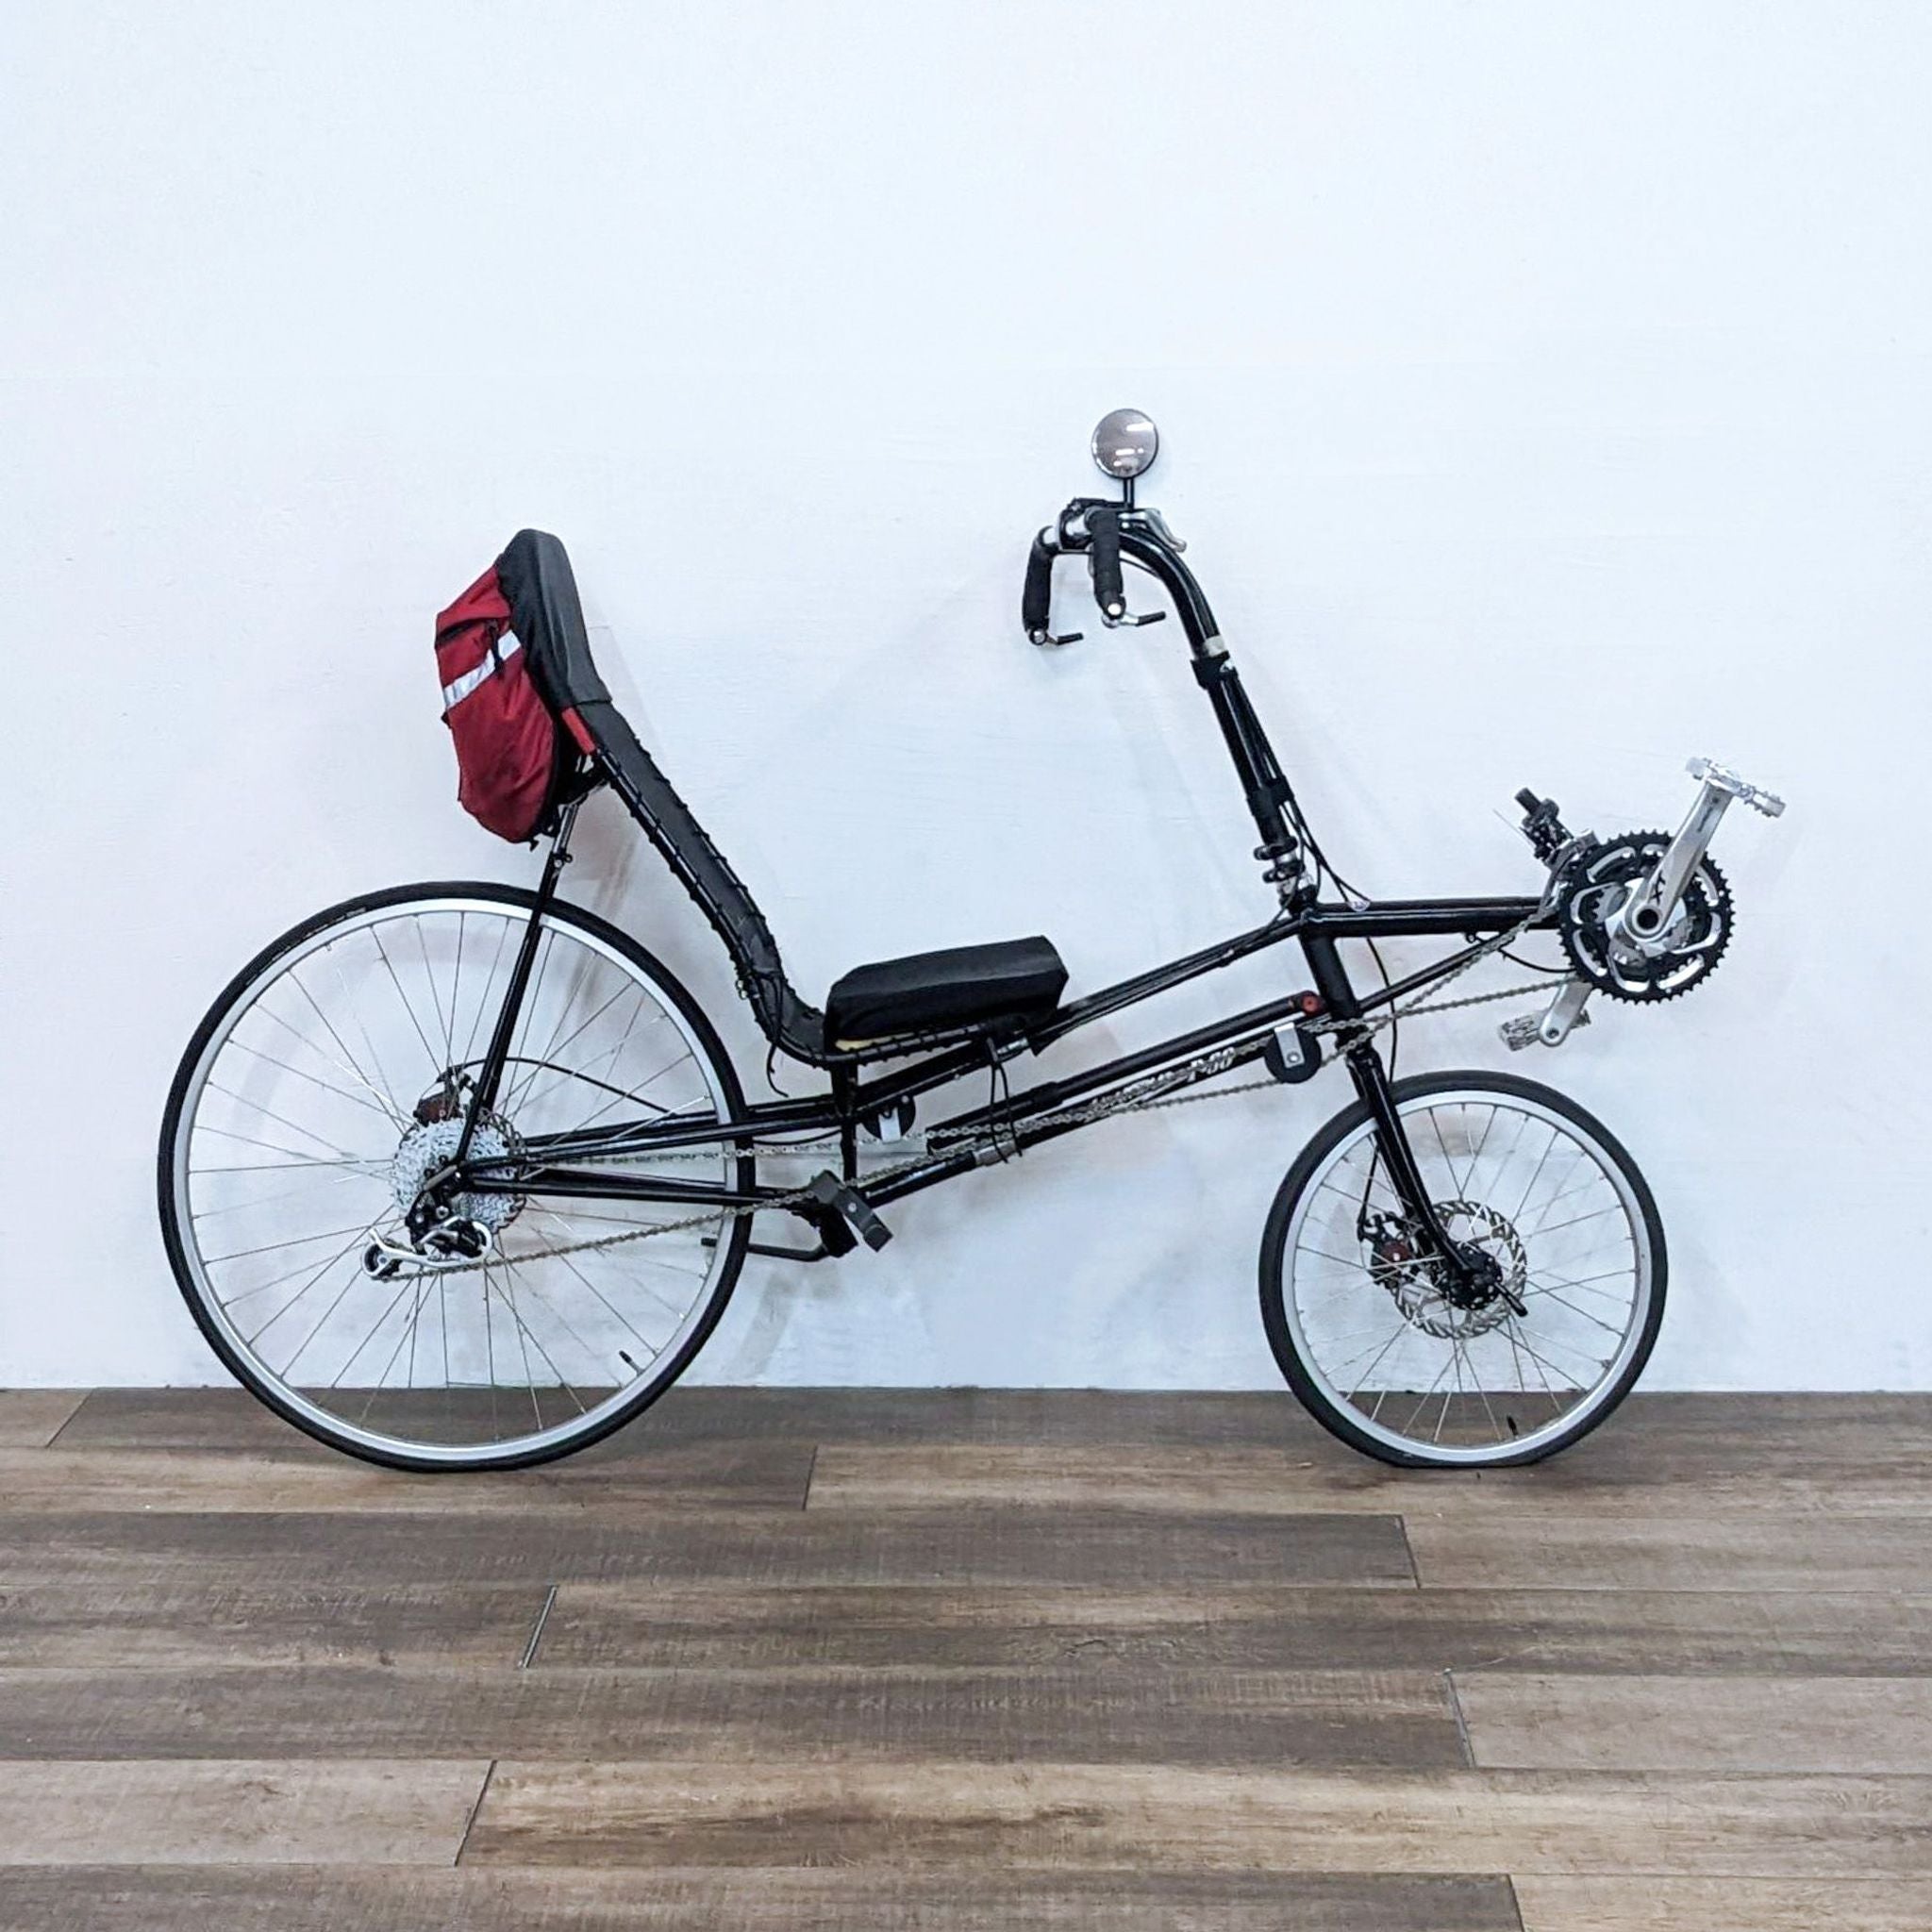 Alt text 1: Black Lightning P-38 recumbent bicycle with red bag mounted on rear, parked on a wood laminate floor against a white wall.